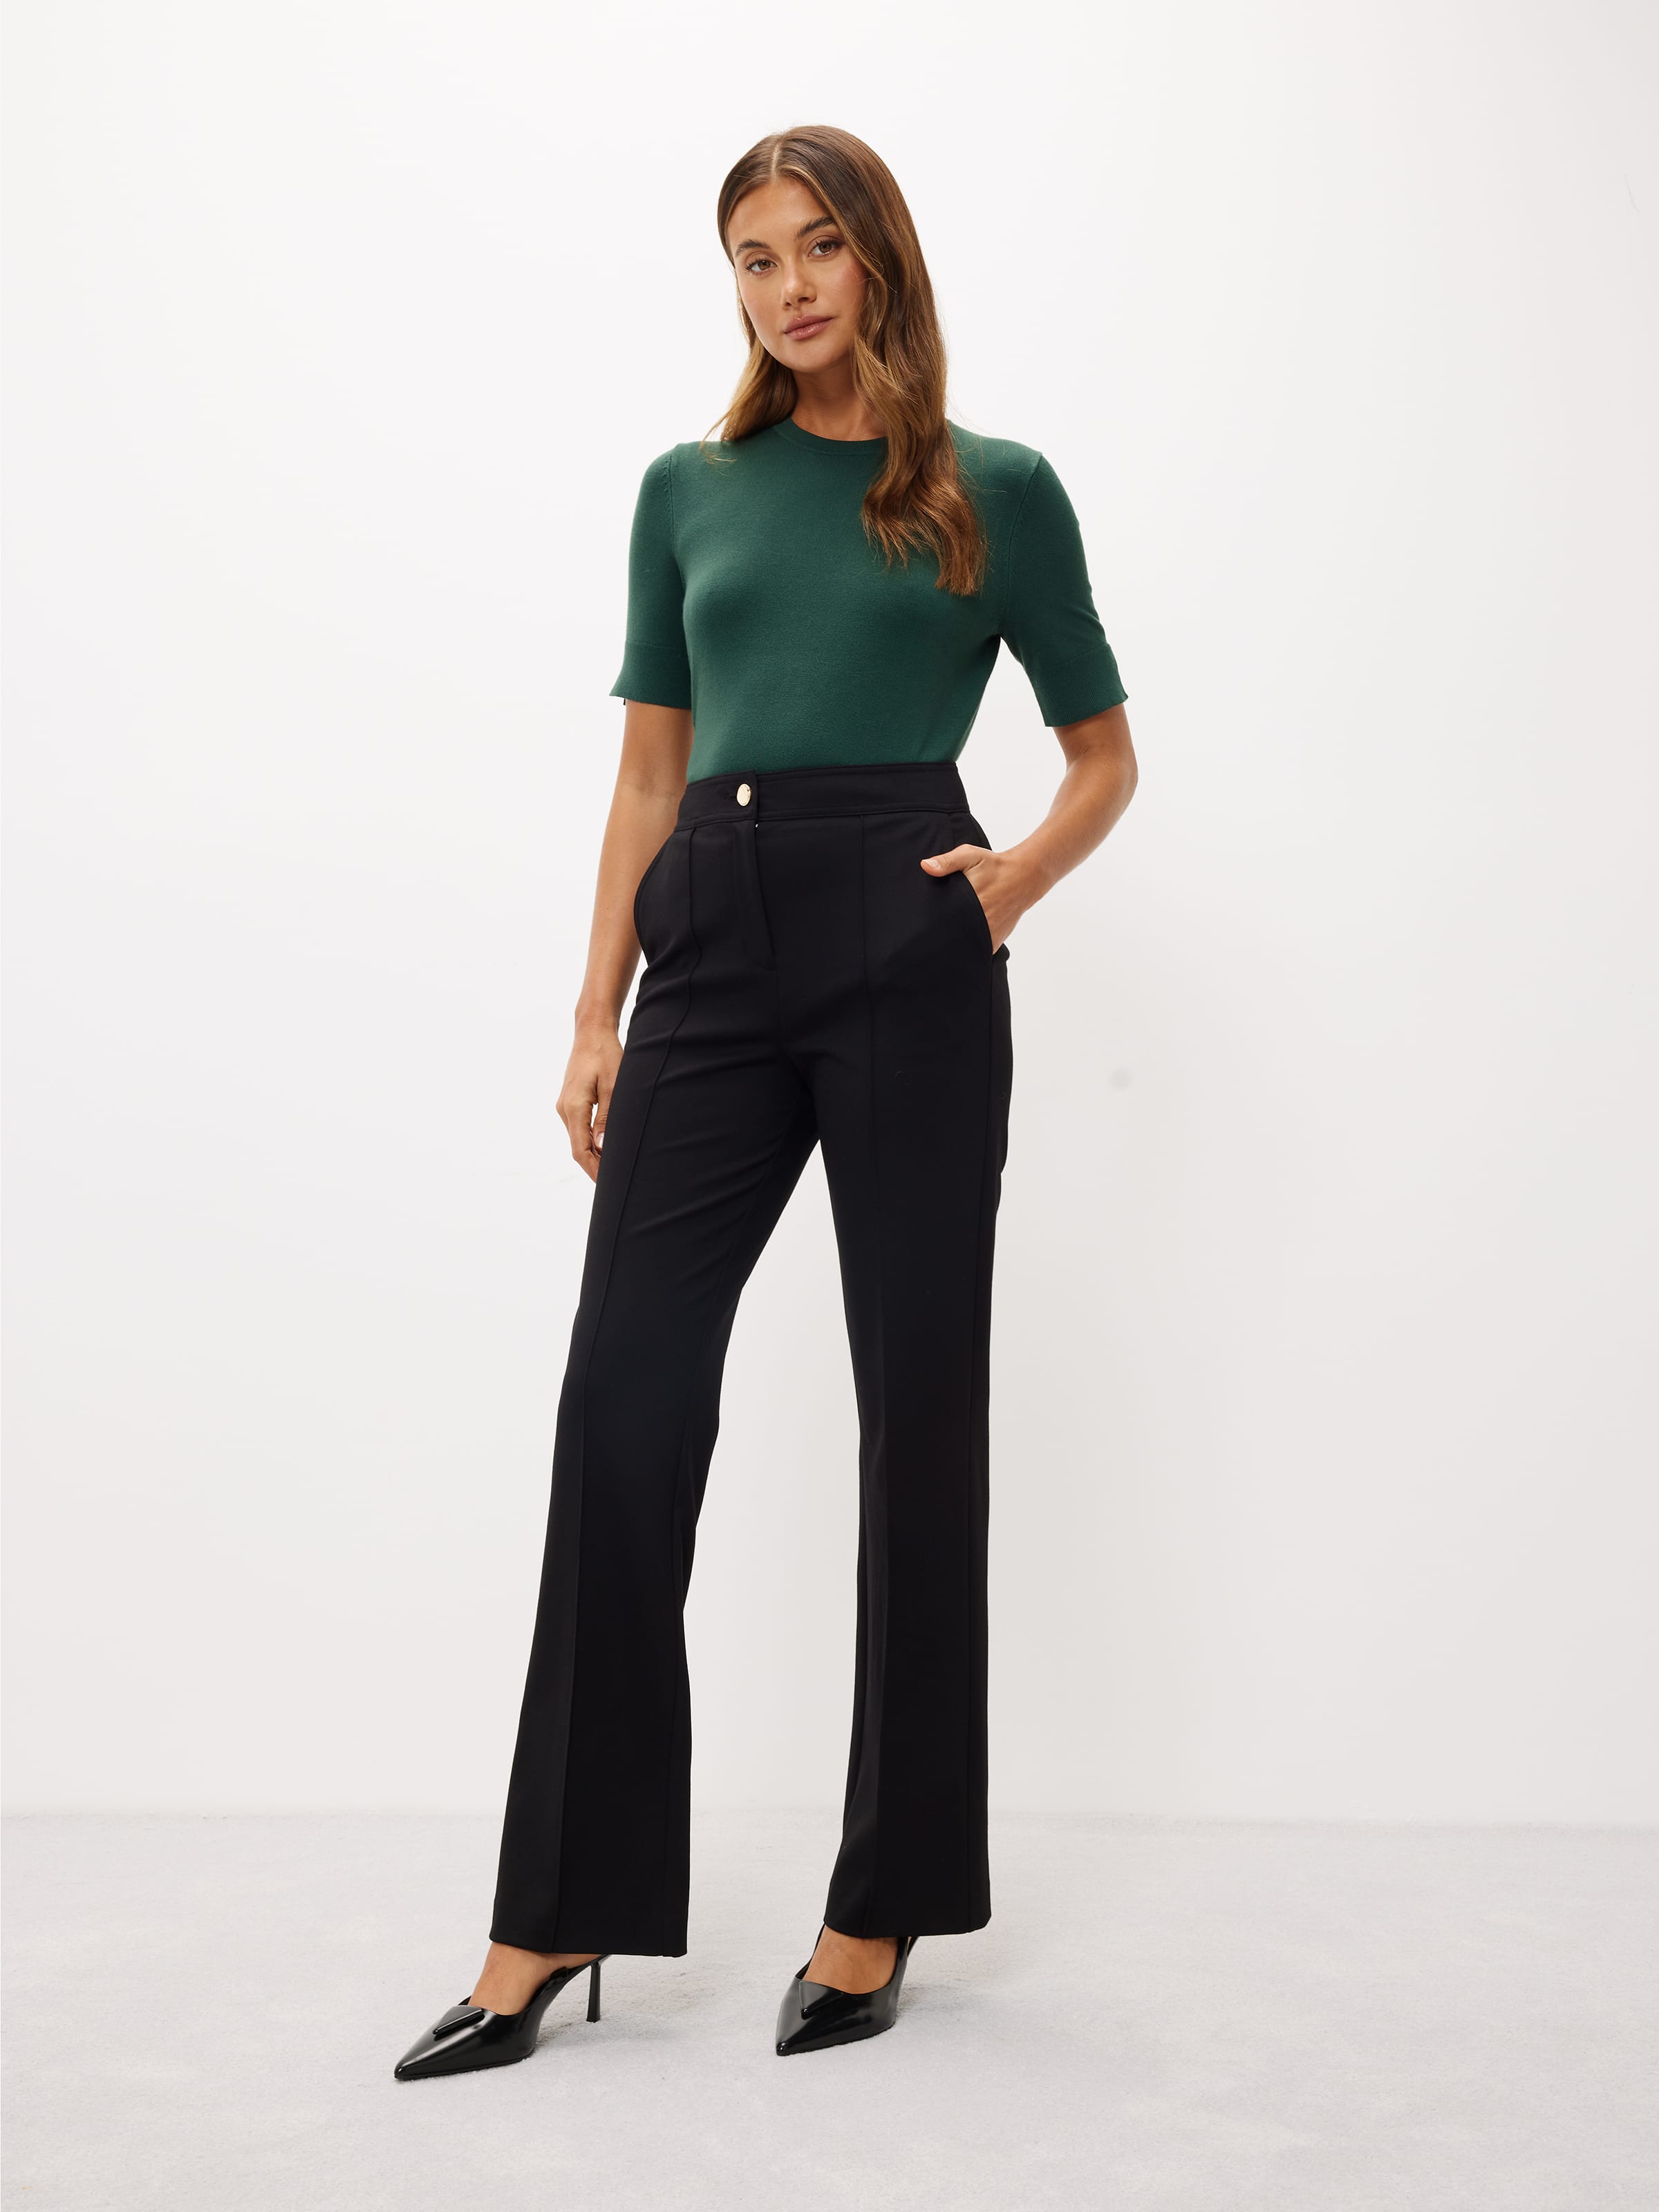 Bonnie Pants - High Waisted Tailored Wide Leg Pants in Pink